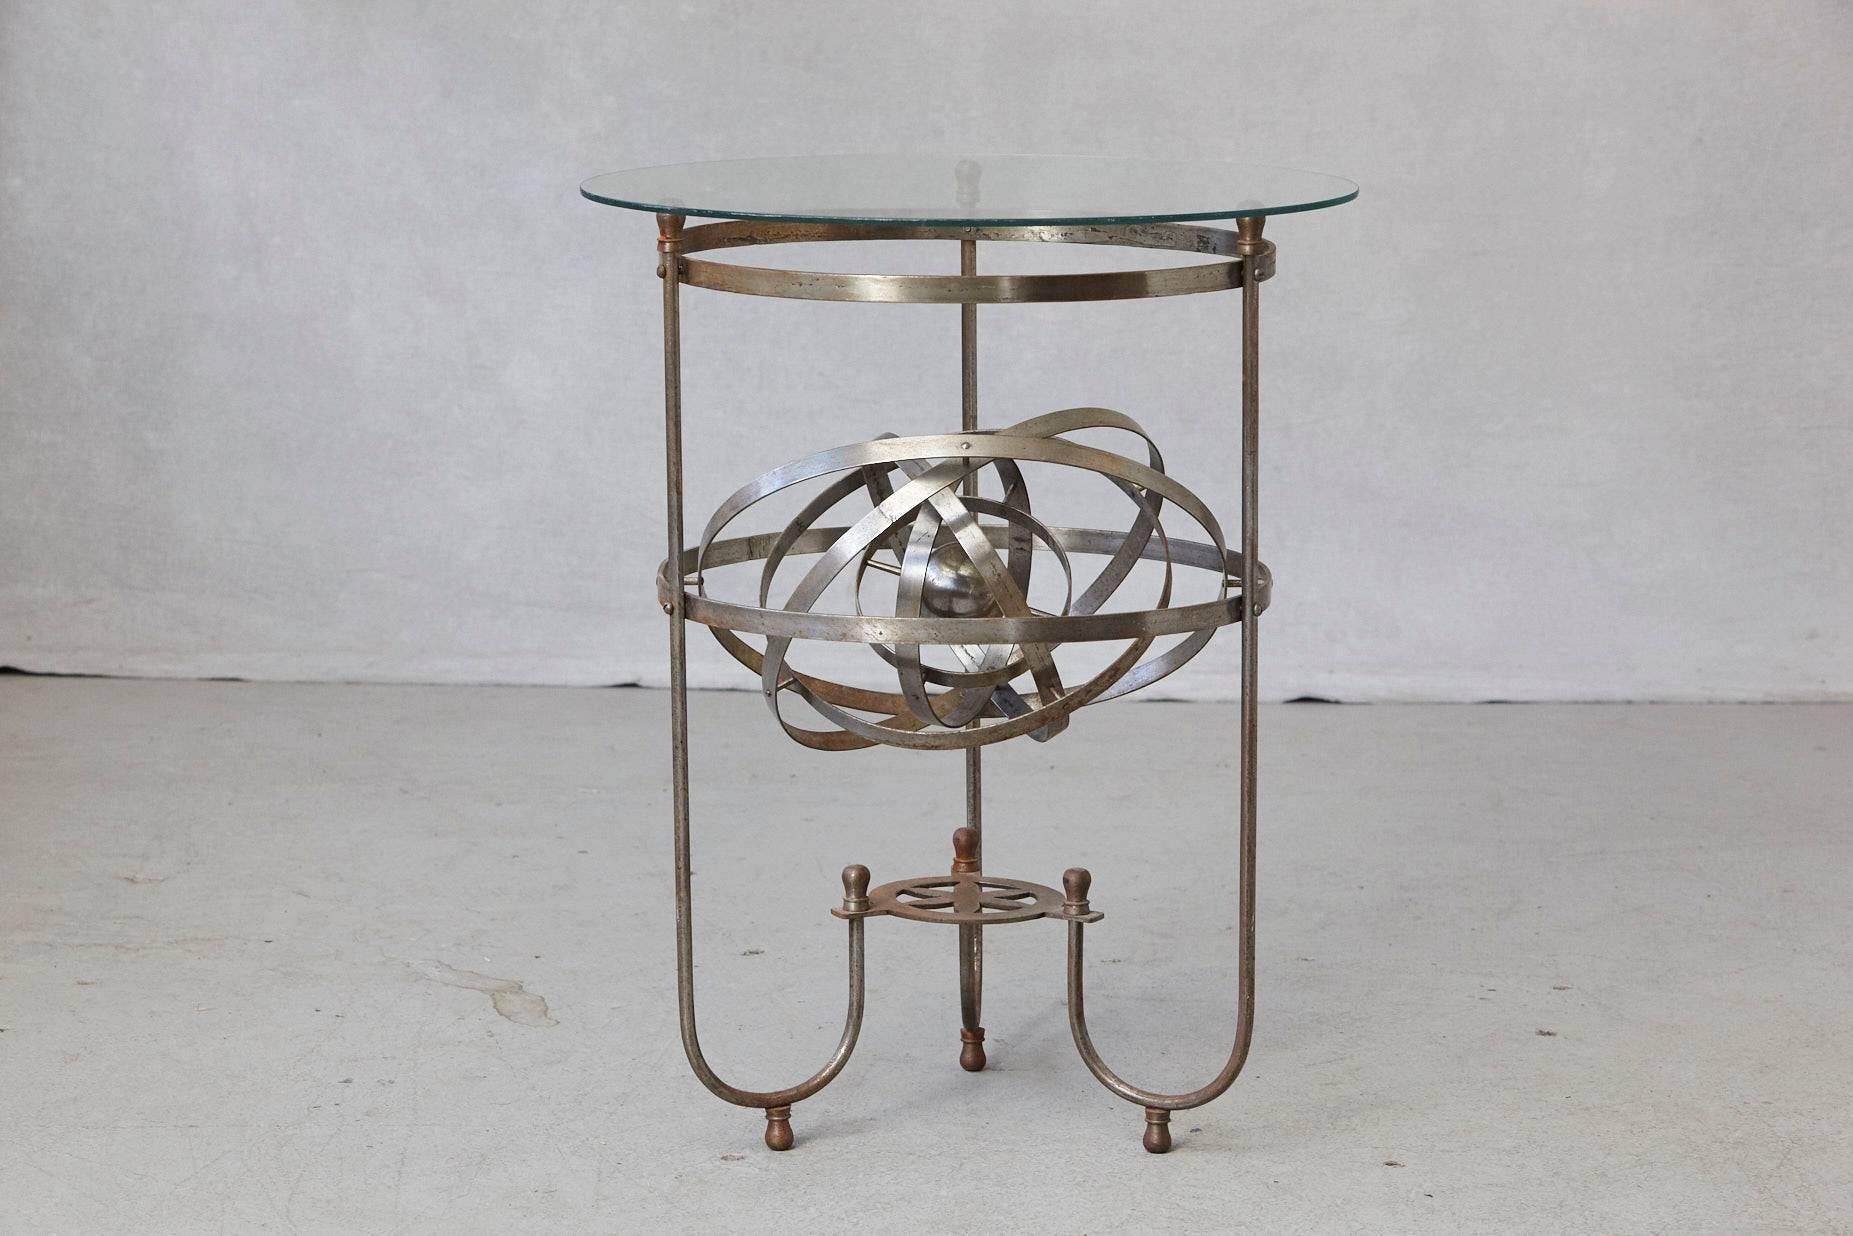 Rare and exceptional kinetic side table with revolving orbital motion, England, 1930s.
Steel base with a perpetual revolving orbit within the table and glass top.
The inner iron ball has an engraving - Sweet Sound Steel Boom.
The table has a